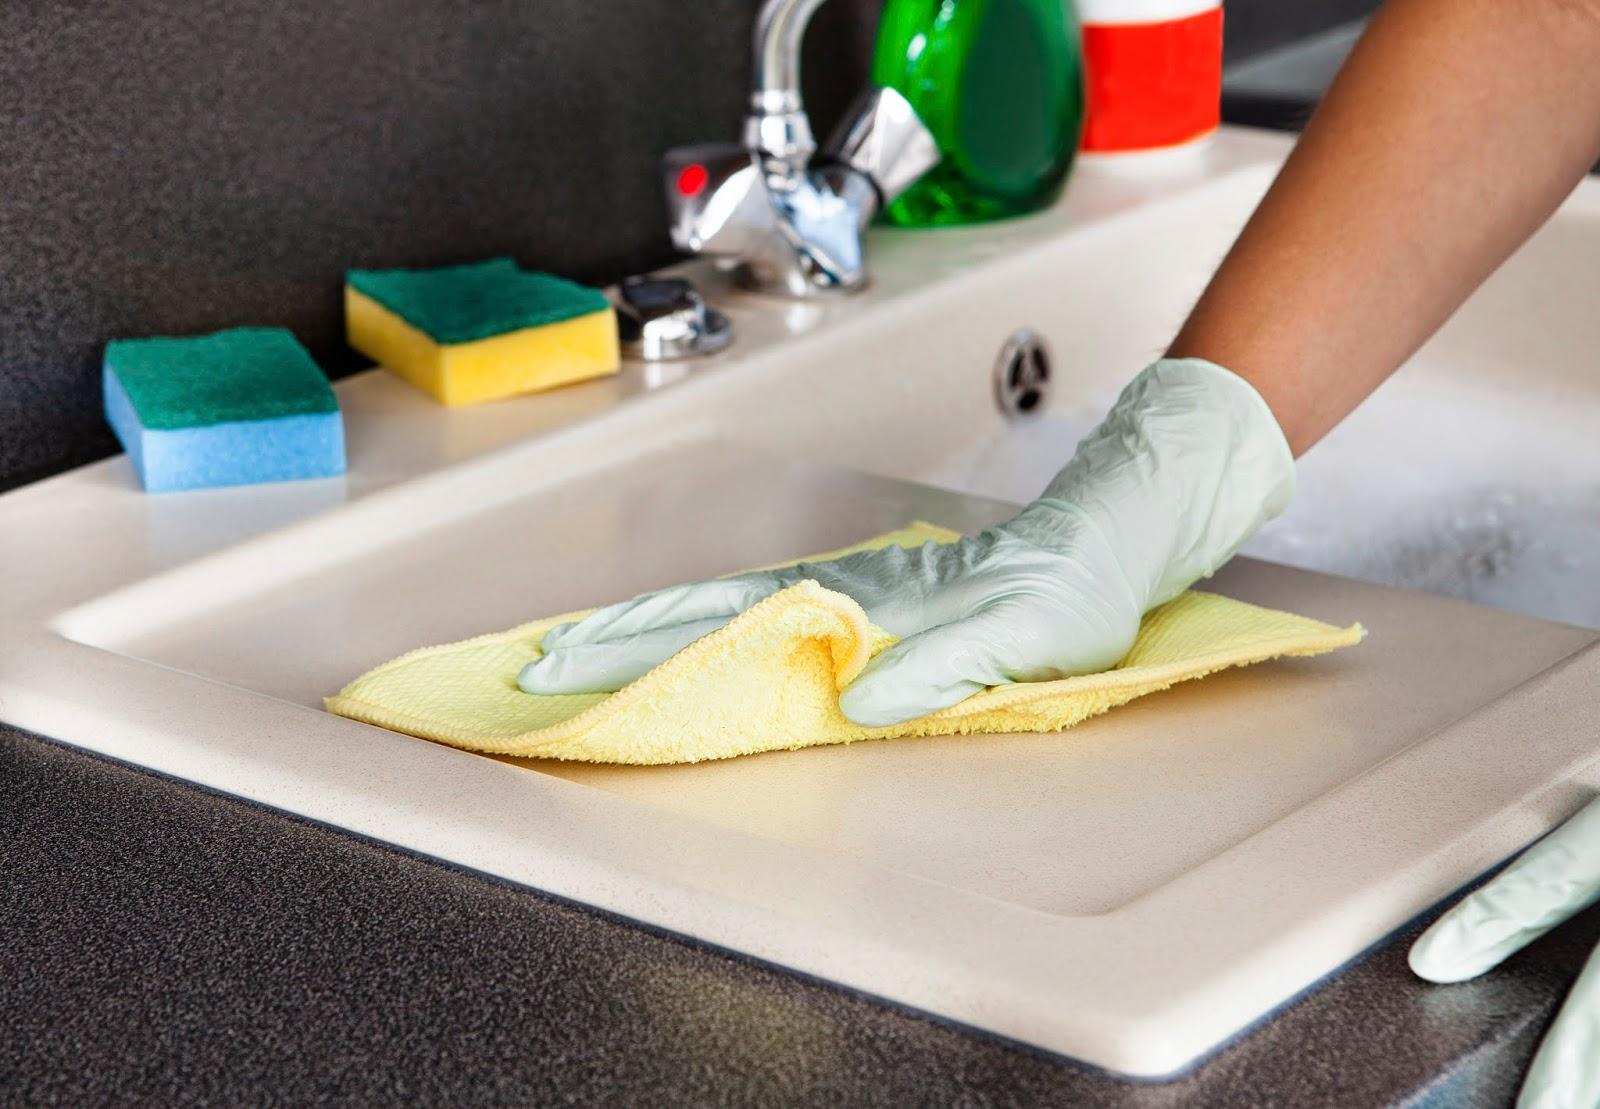 Cleaning a kitchen sink with gloves on